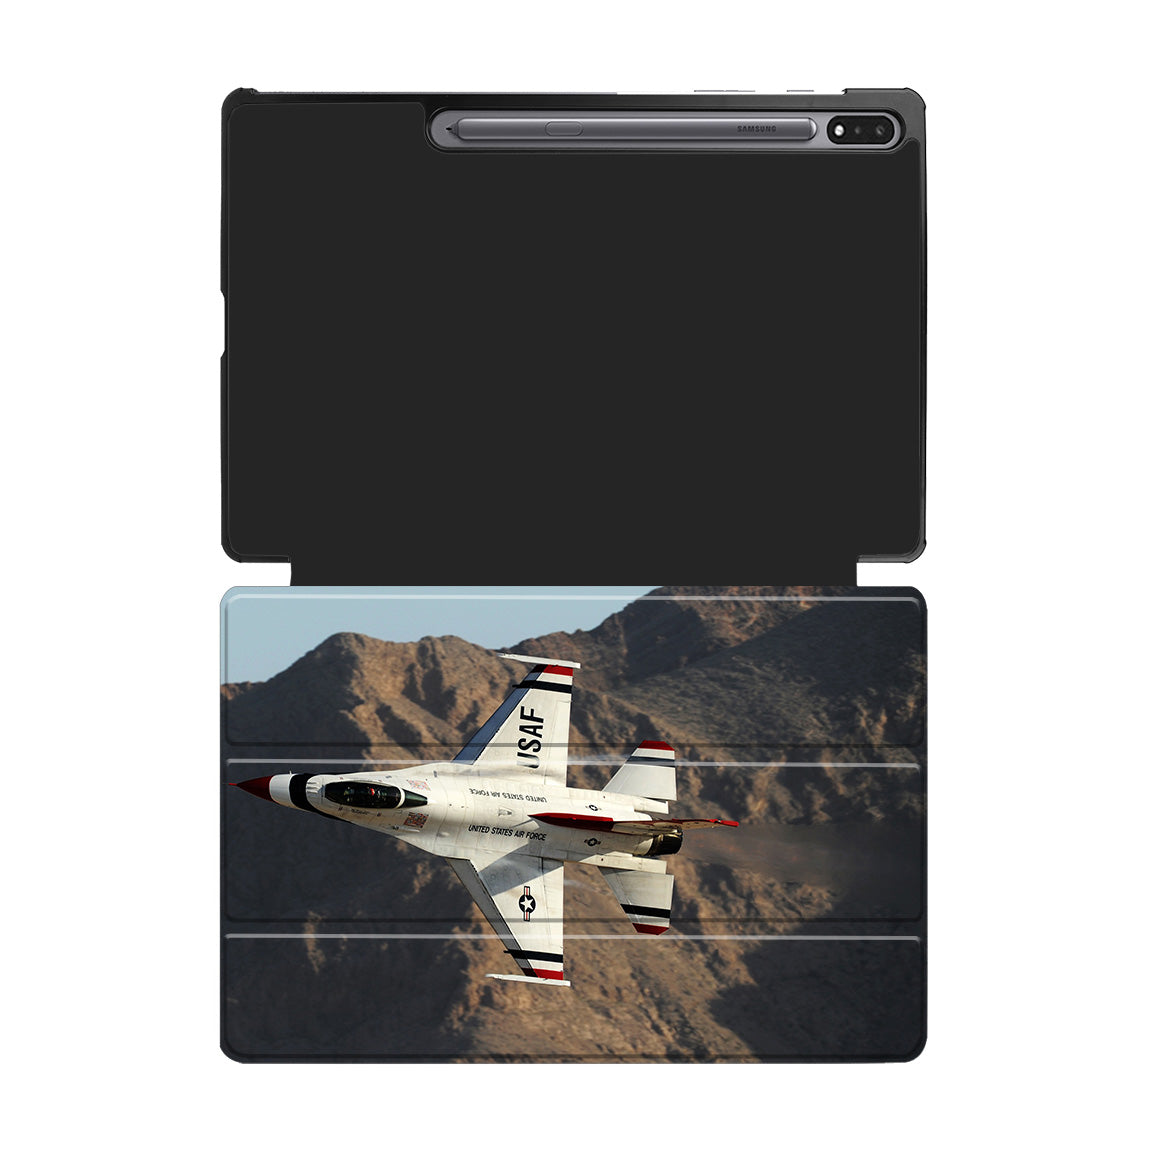 Amazing Show by Fighting Falcon F16 Designed Samsung Tablet Cases